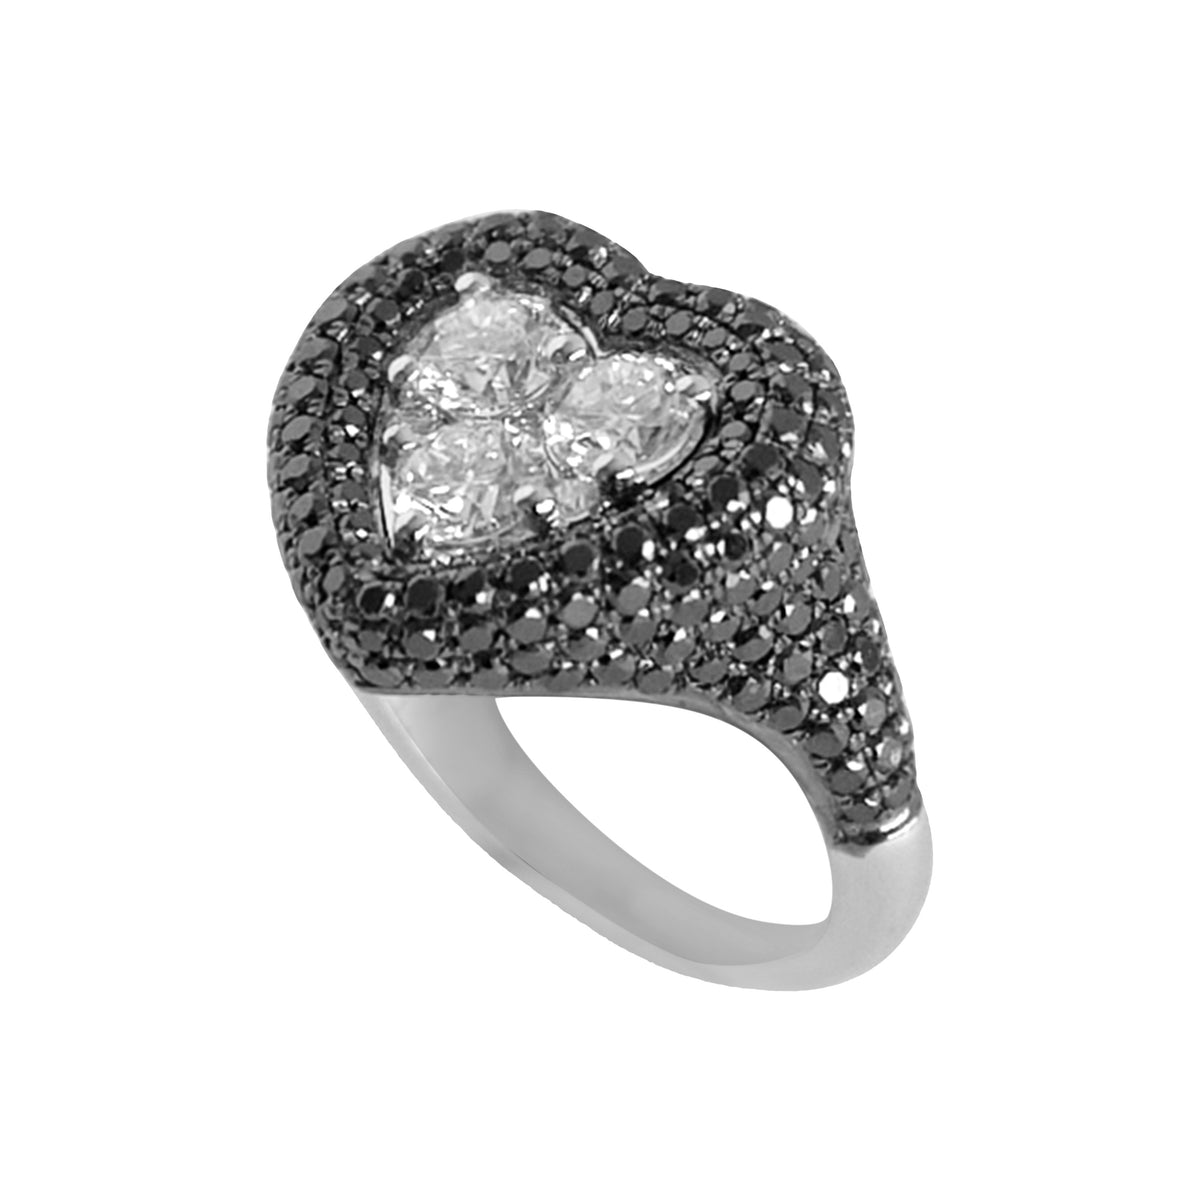 The Manaal 18k white gold diamond pinky ring